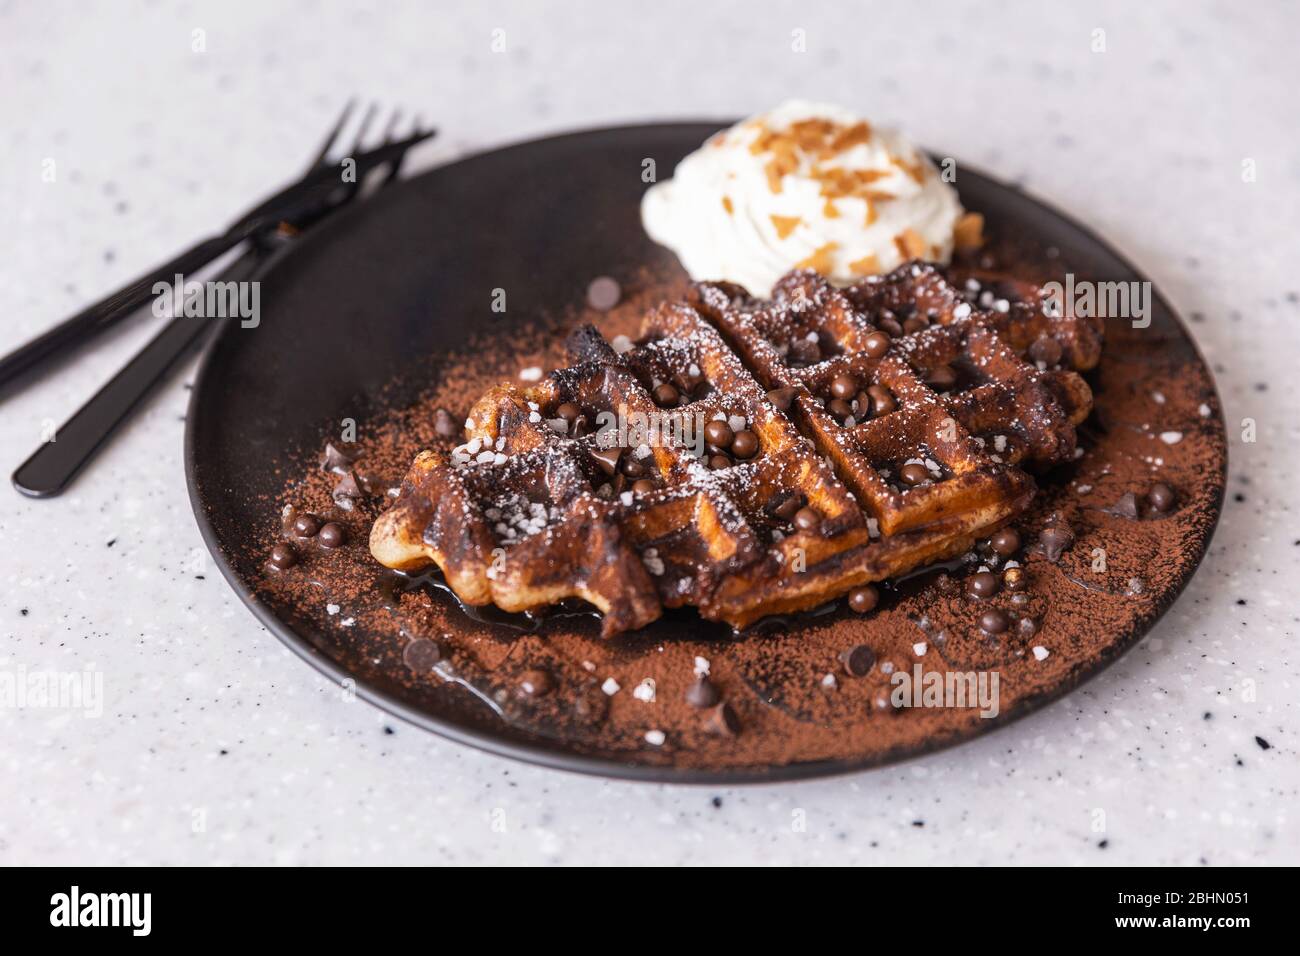 Yummy homemade Belgian waffle topping with dark chocolate syrup, cocoa powder and chocolate chips, served with whipped cream in brown color plate. Stock Photo